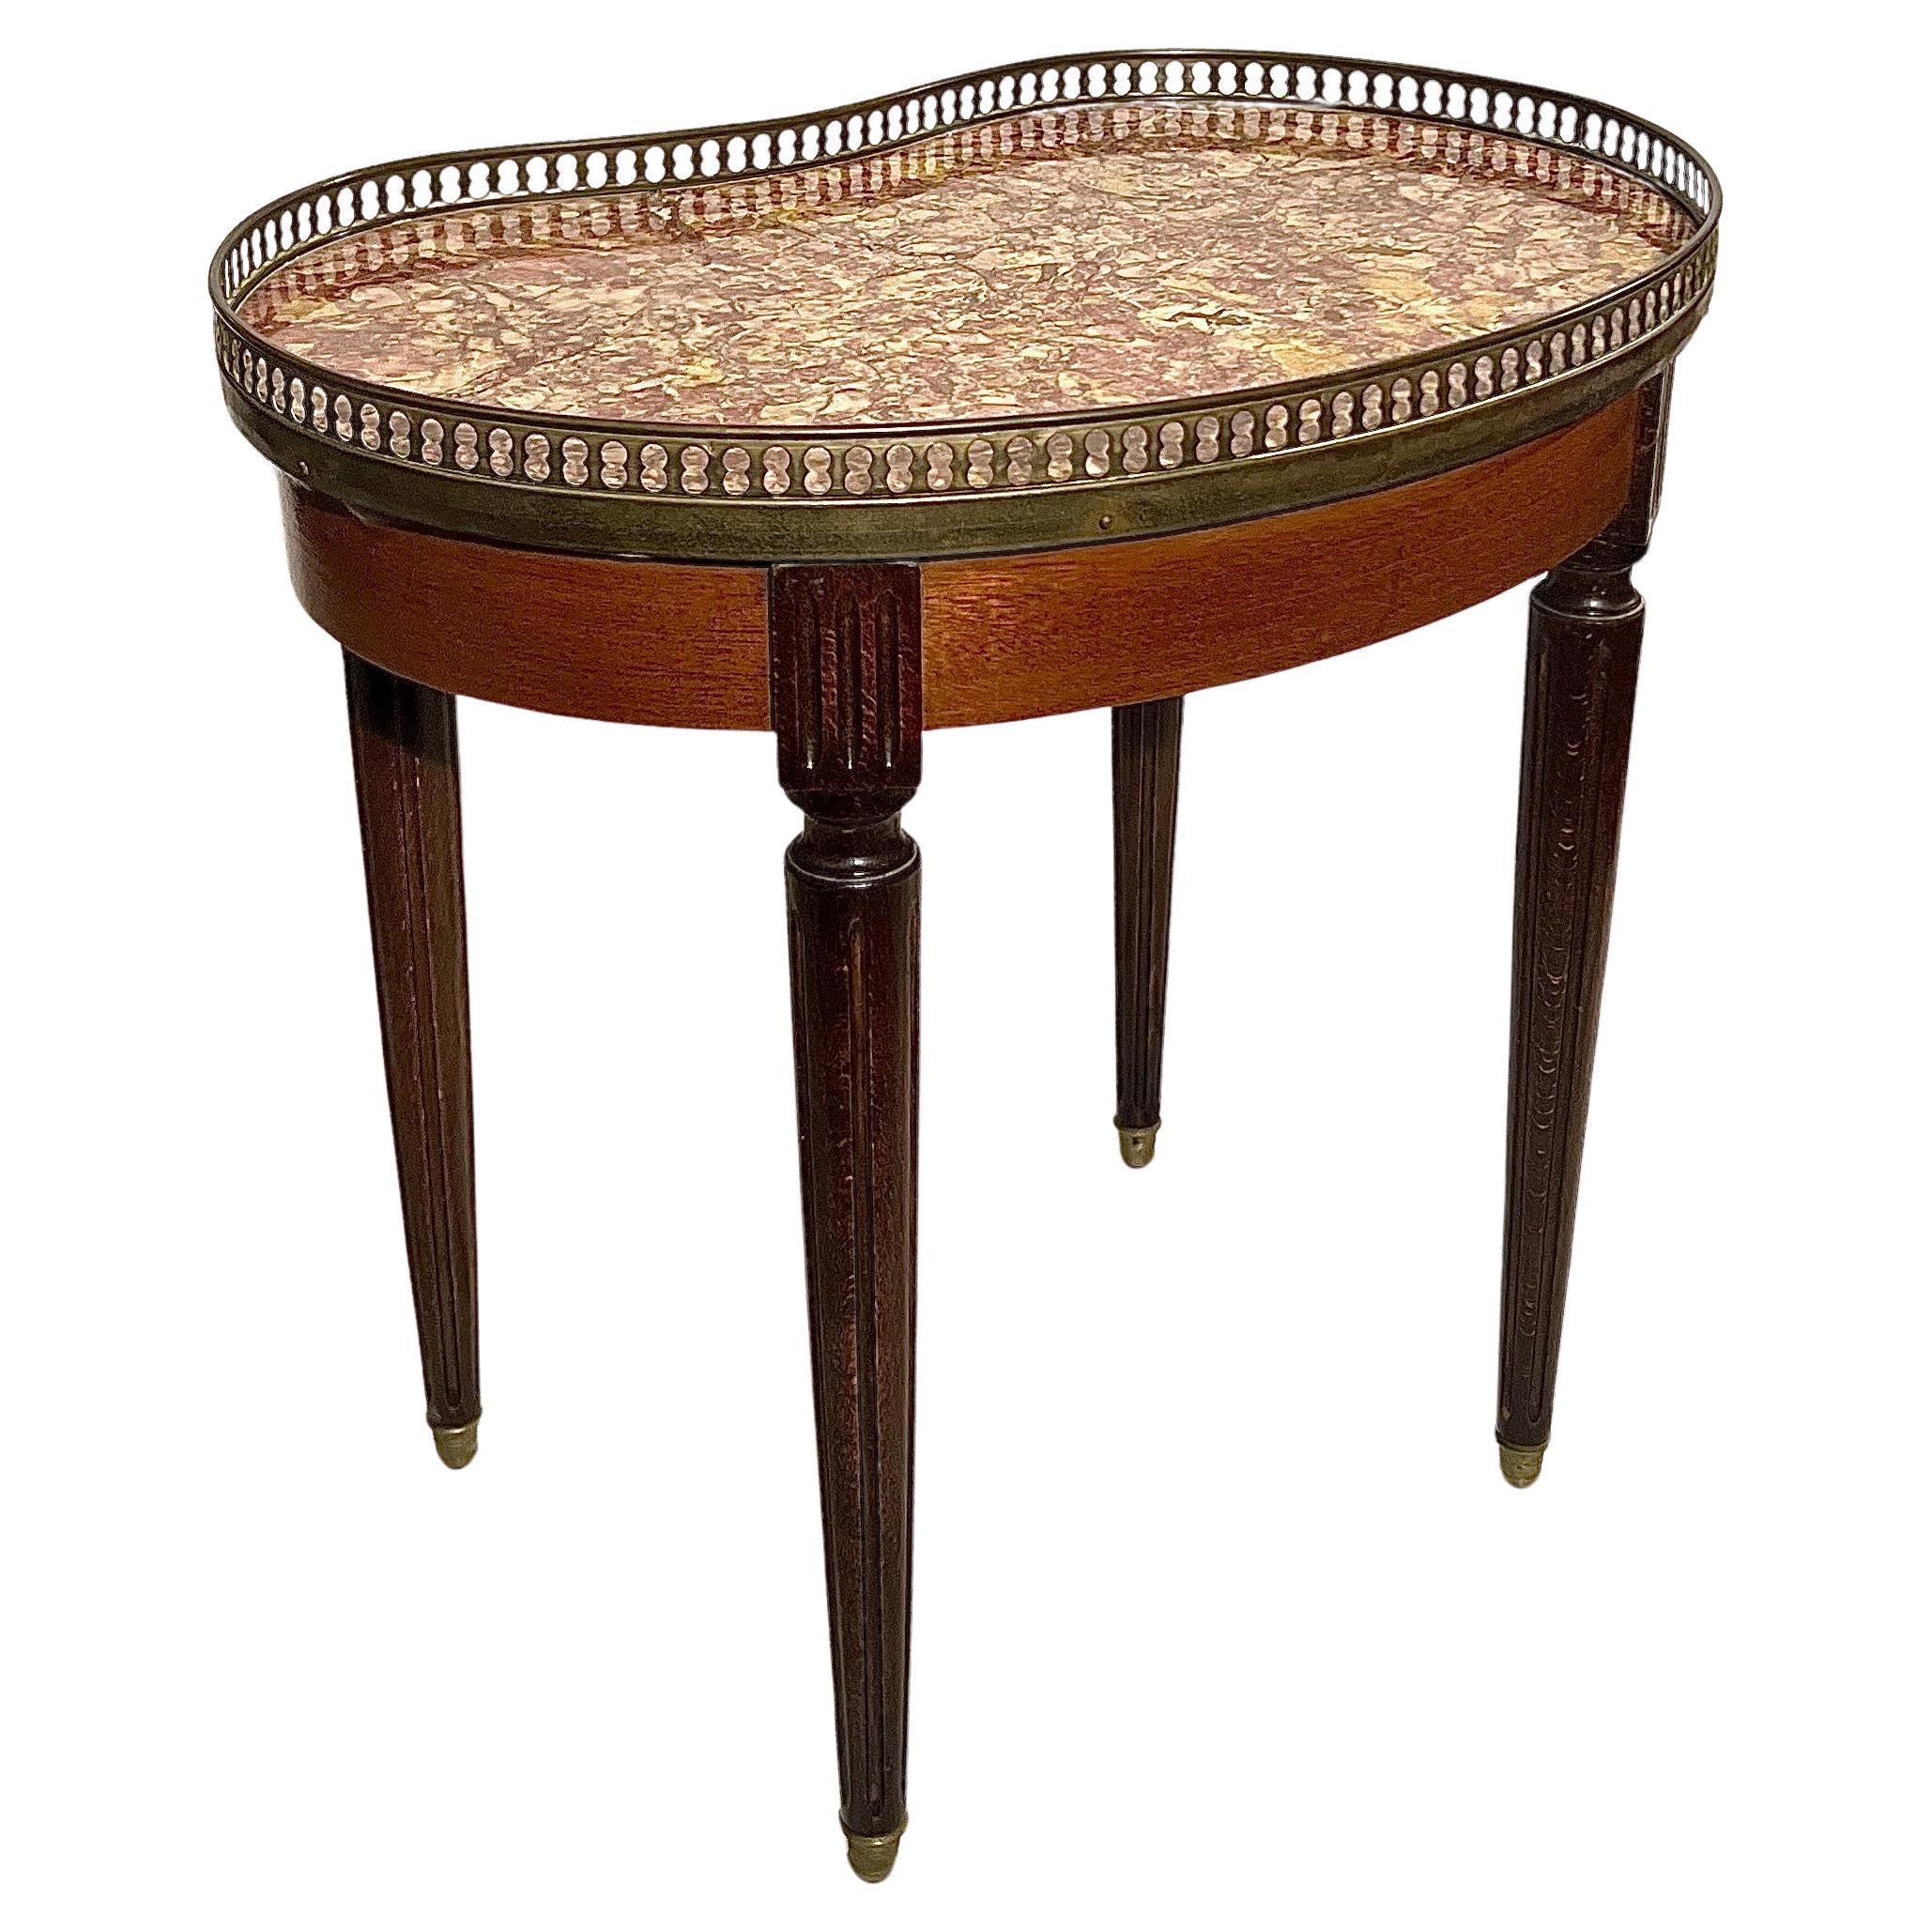 Antique French Marble Top Kidney-shaped Table, Circa 1910-1920. For Sale